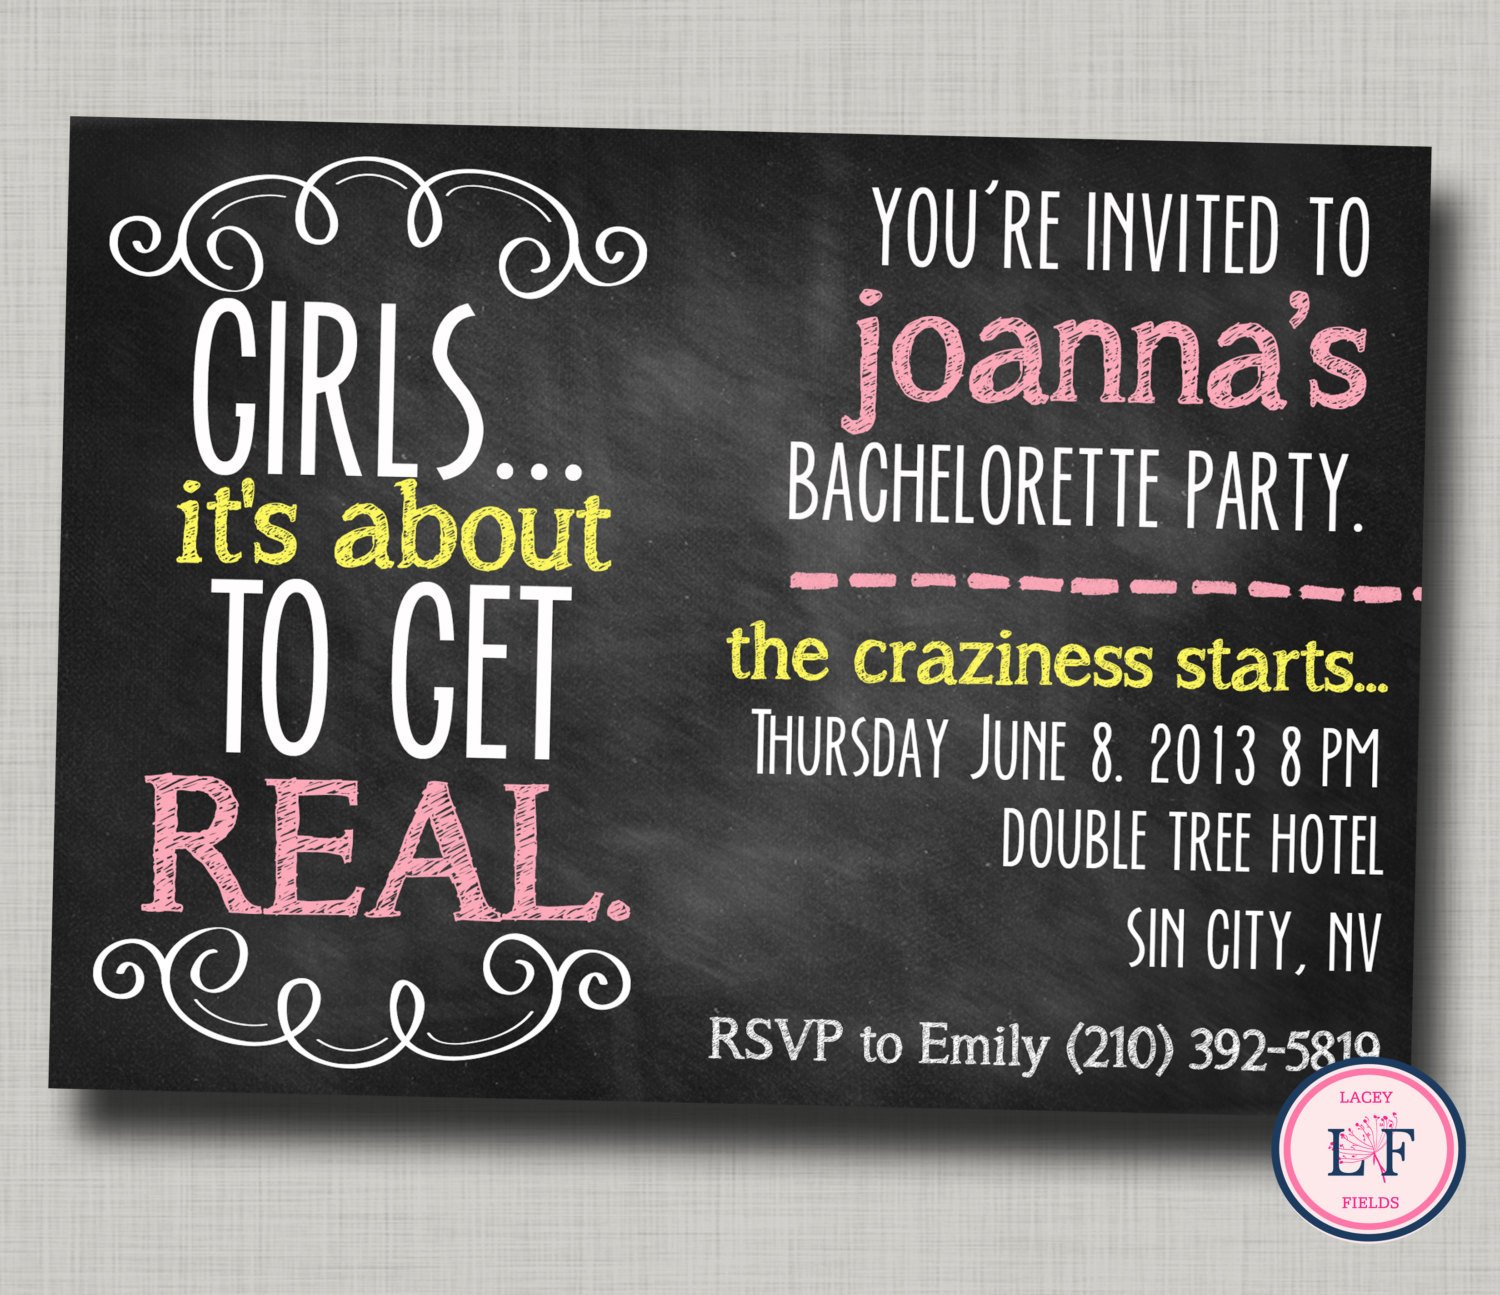 Bachelorette Party Invitations Template Free Bachelorette Party Invitation Printable Chalkboard by